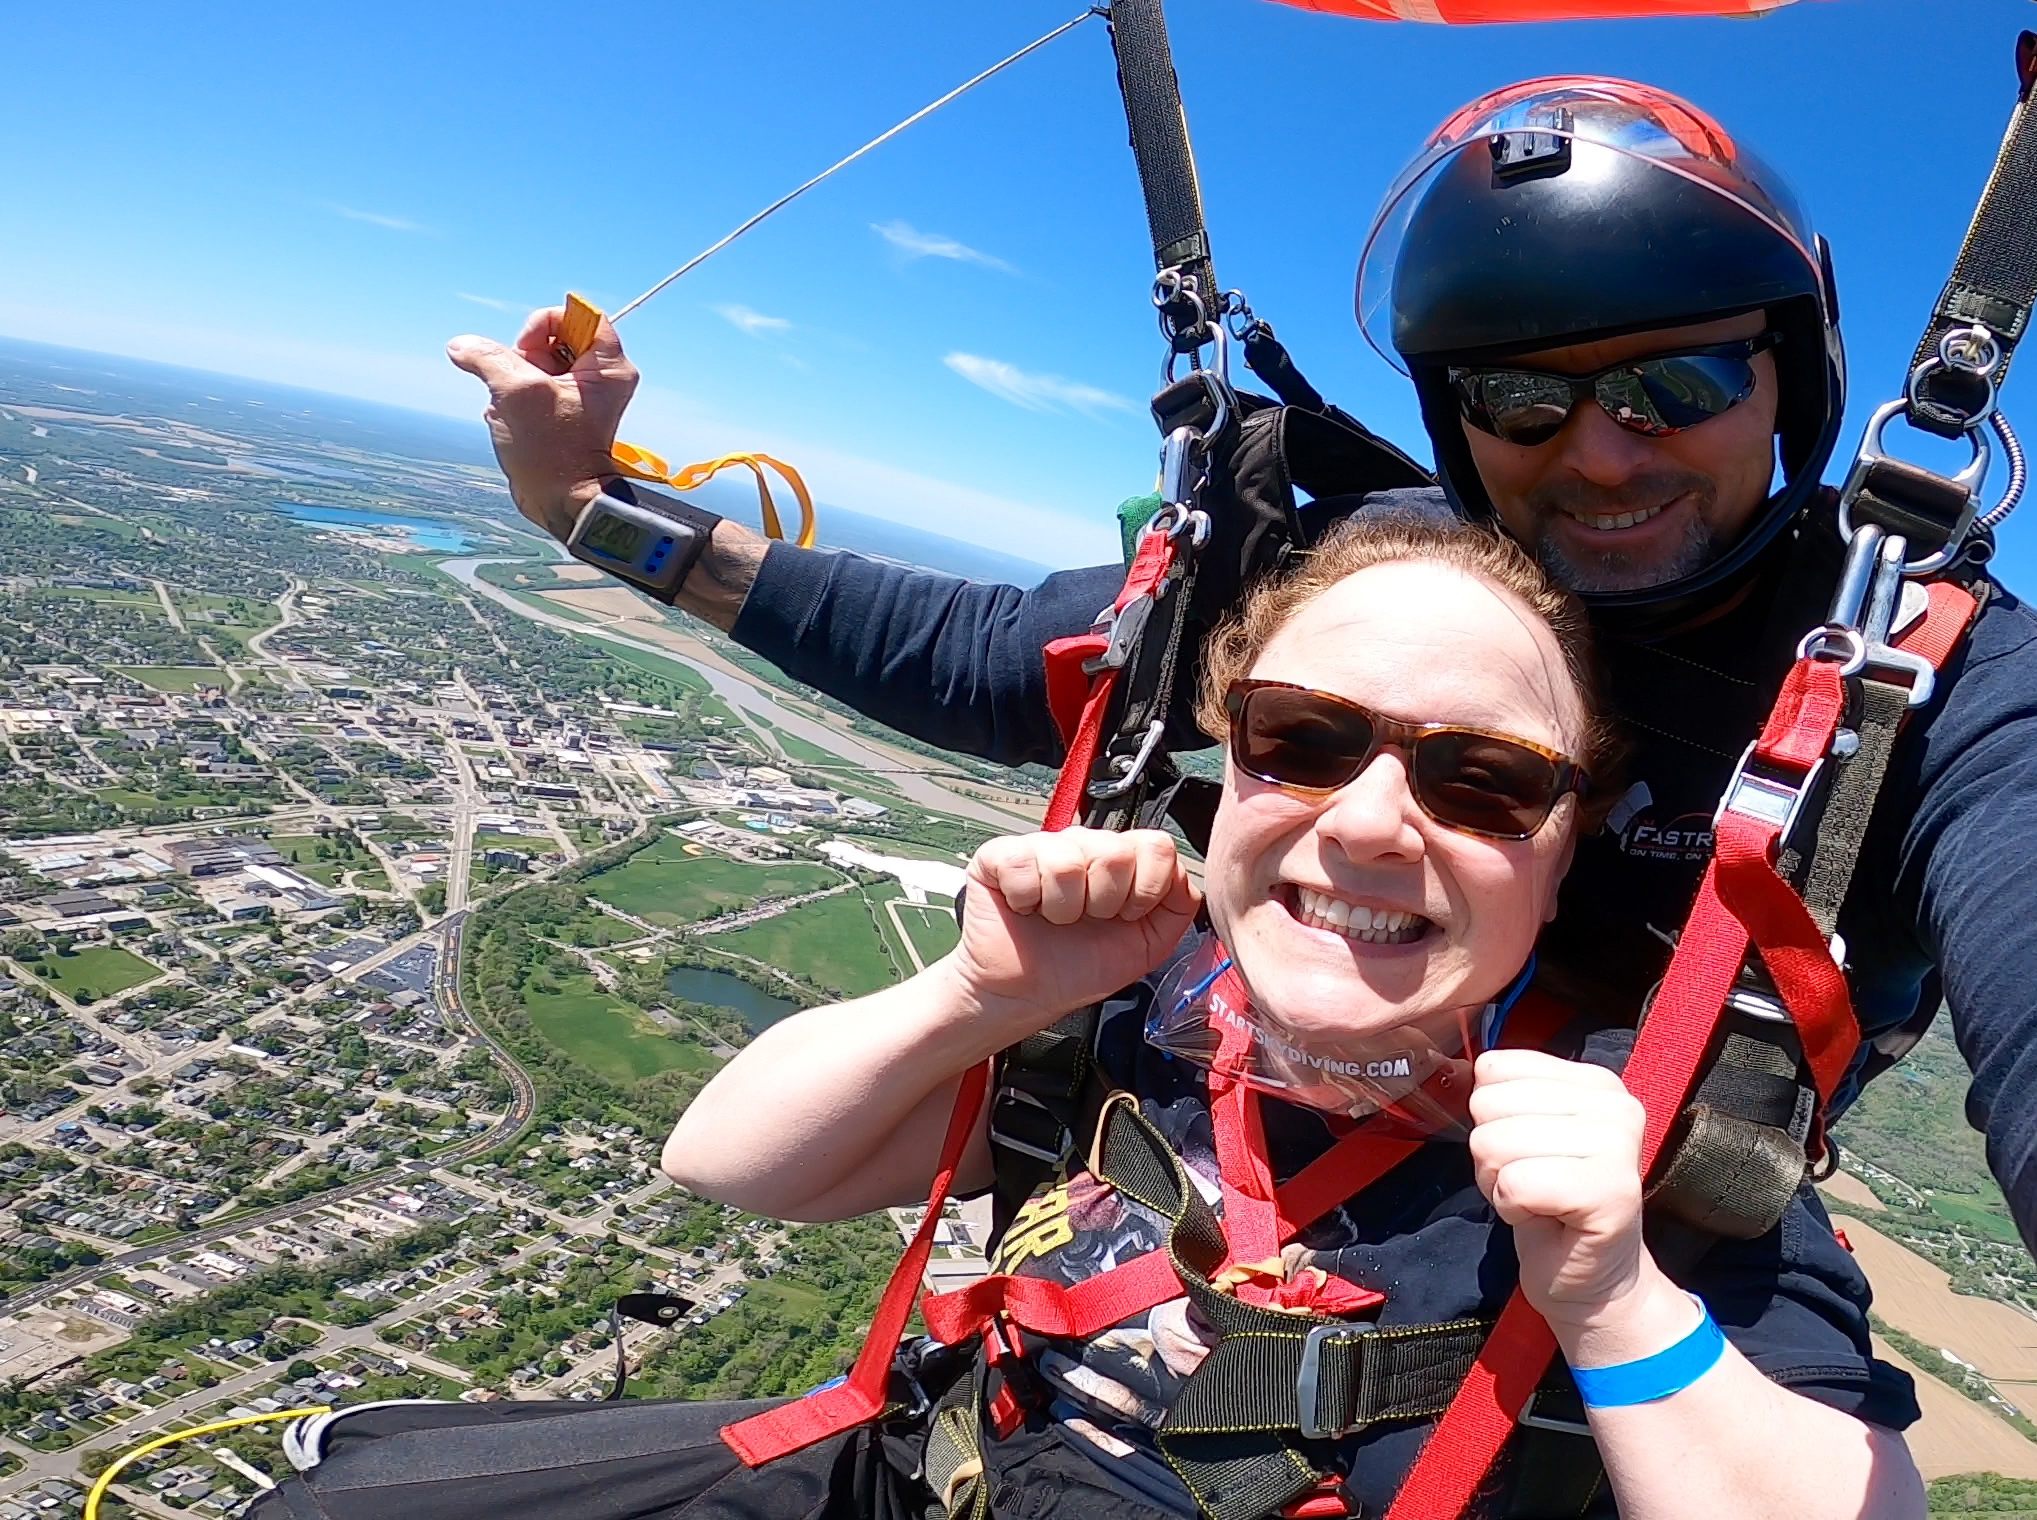 Macy skydiving in (above) Ohio.